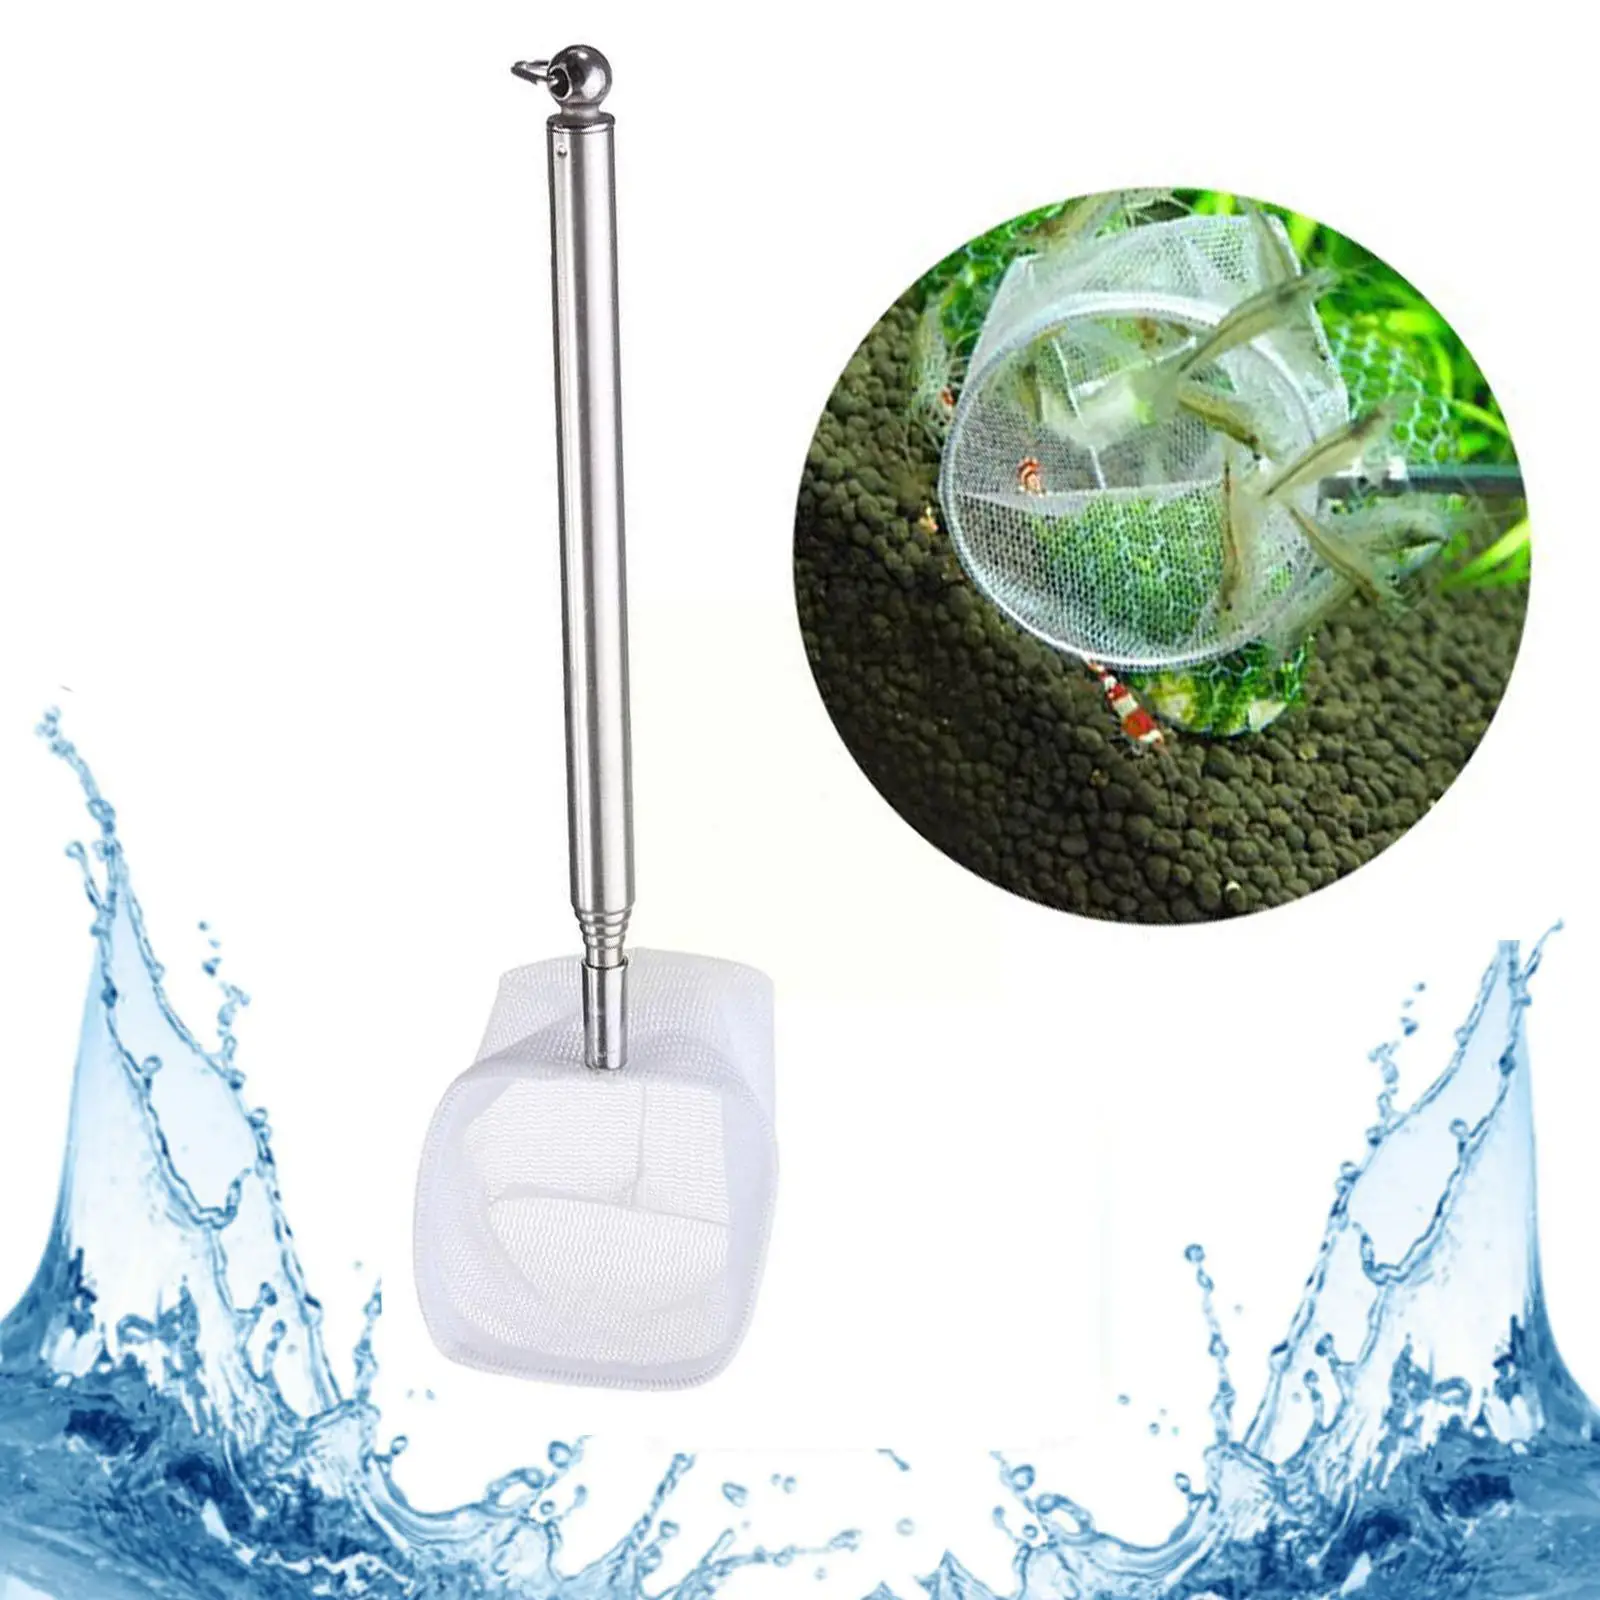 Mini Adjustable Fish Tank Catch Net Stainless Steel Square Round Scoop Scoop Fish Catching Nets Shrimp Accessory Pocket Shr X7Q9